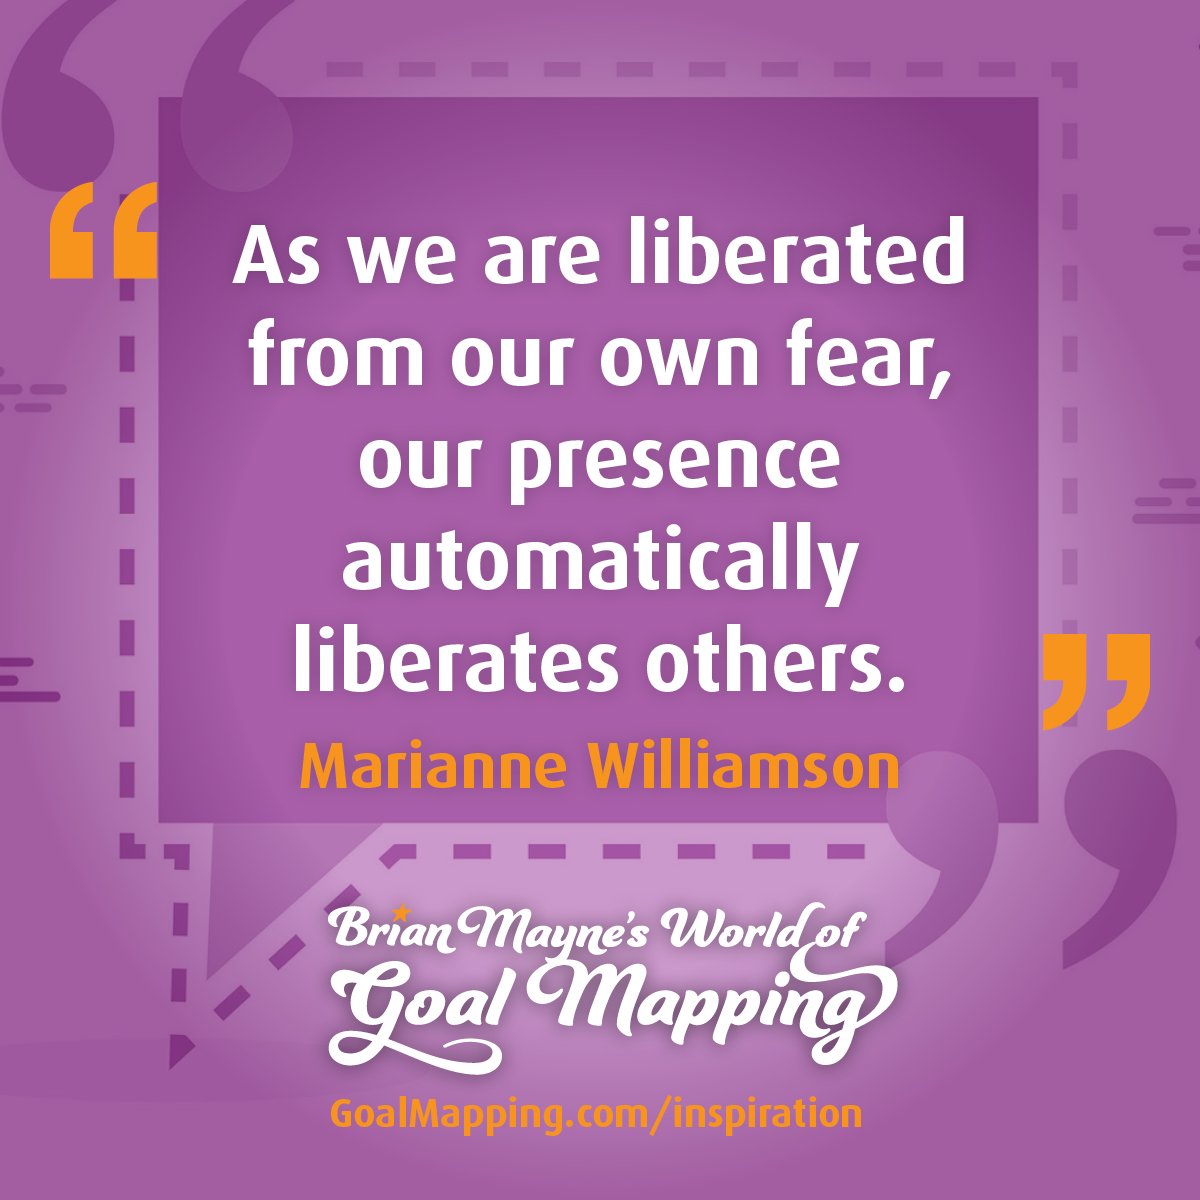 "As we are liberated from our own fear, our presence automatically liberates others." Marianne Williamson